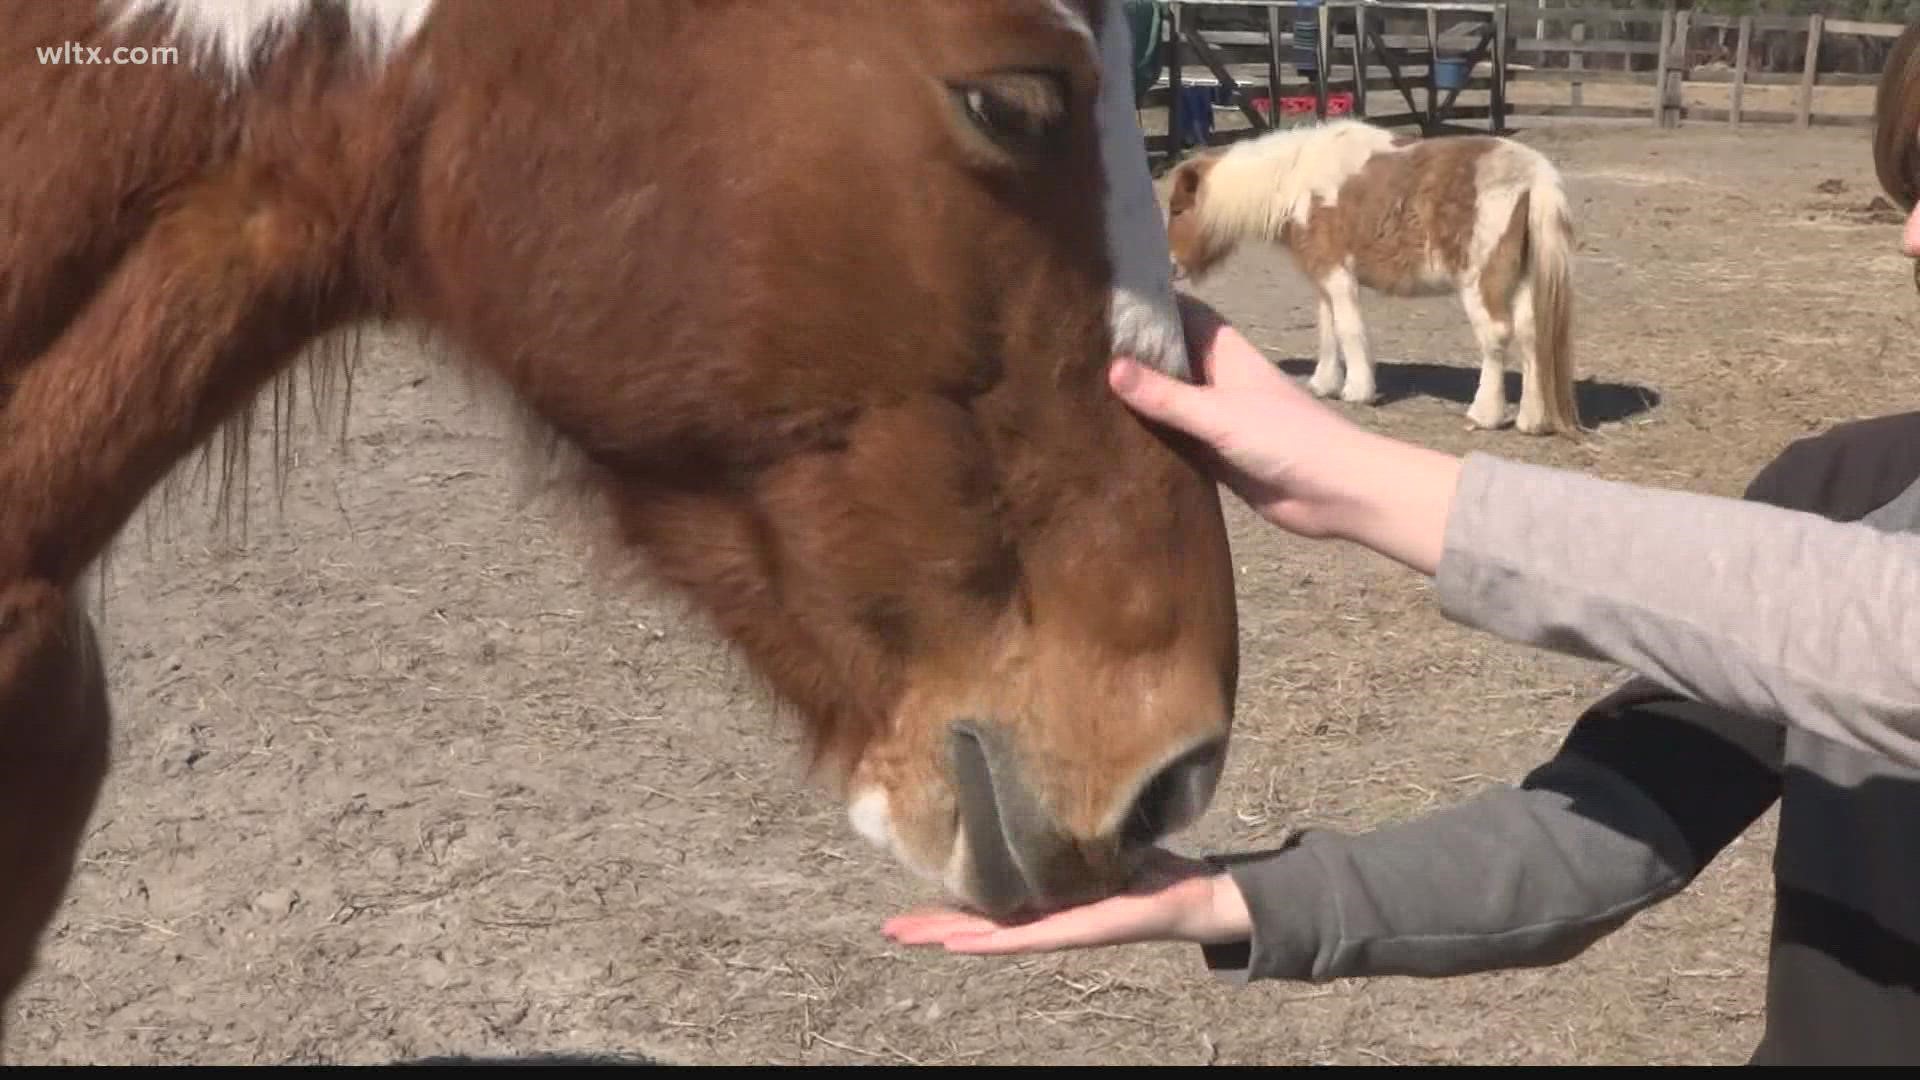 The founder of Hooves, Hearts and Hope an equine therapy program that helped Lexington County children with special needs died suddenly.